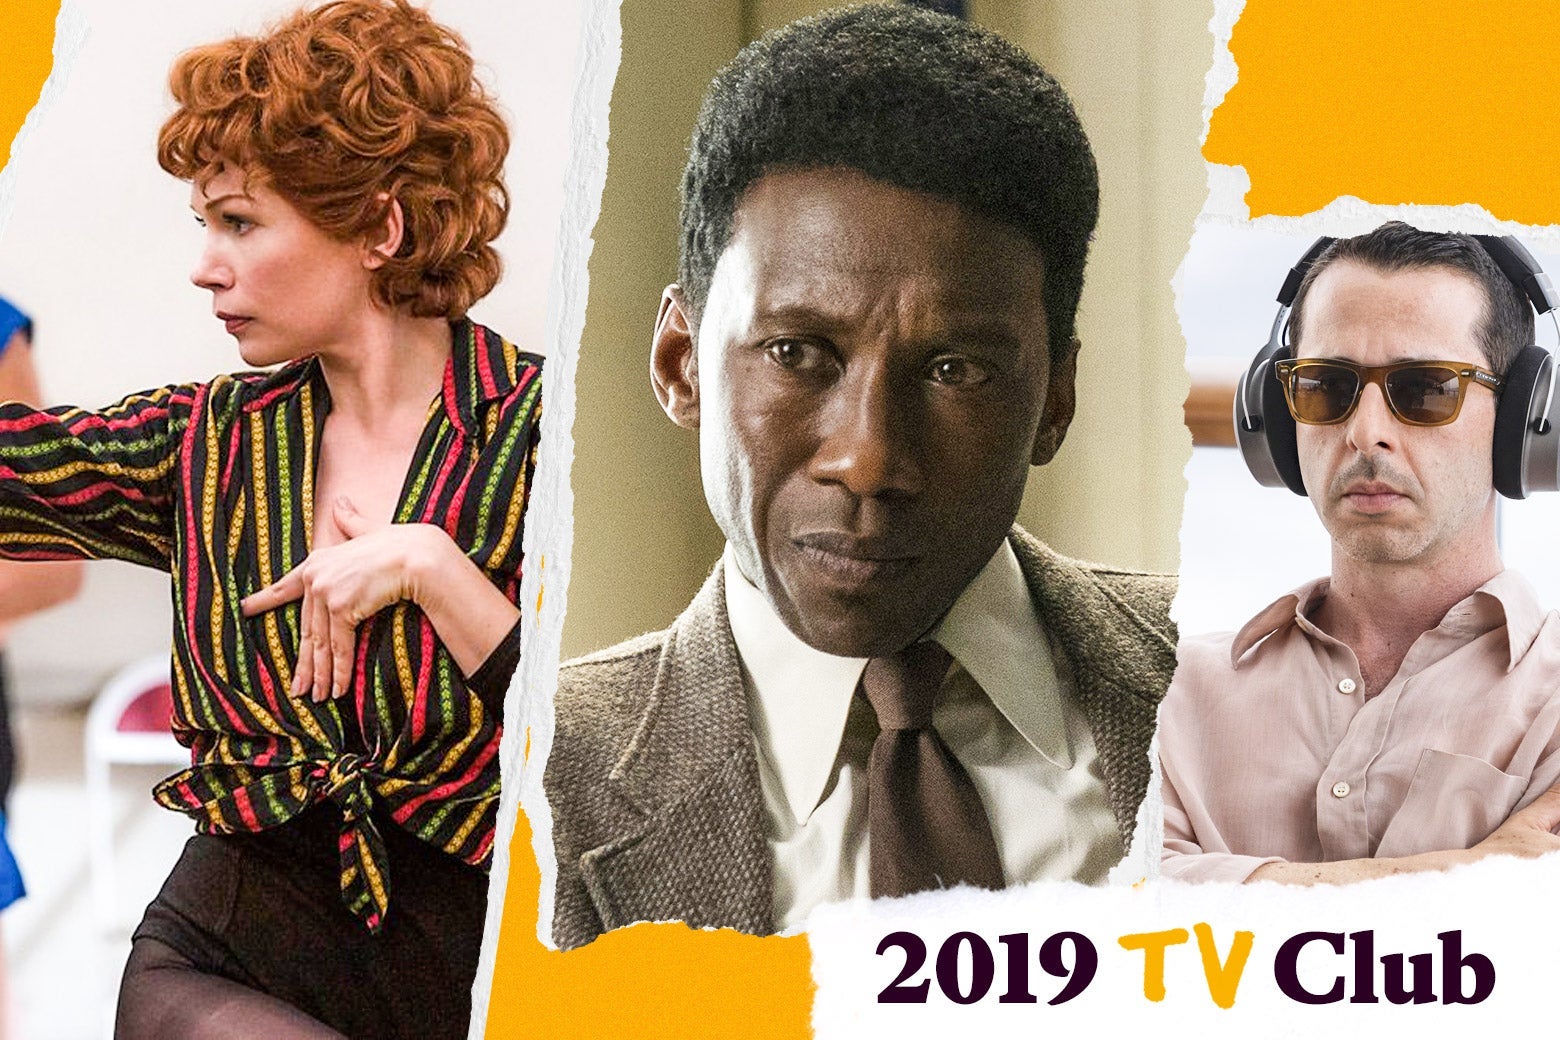 Collage of Michelle Williams in Fosse/Verdon dancing in a striped shirt, Mahershala Ali in True Detective wearing a suit and looking serious, and Jeremy Strong in Succession on a boat pouting with headphones on. Text in the corner says 2019 TV Club.